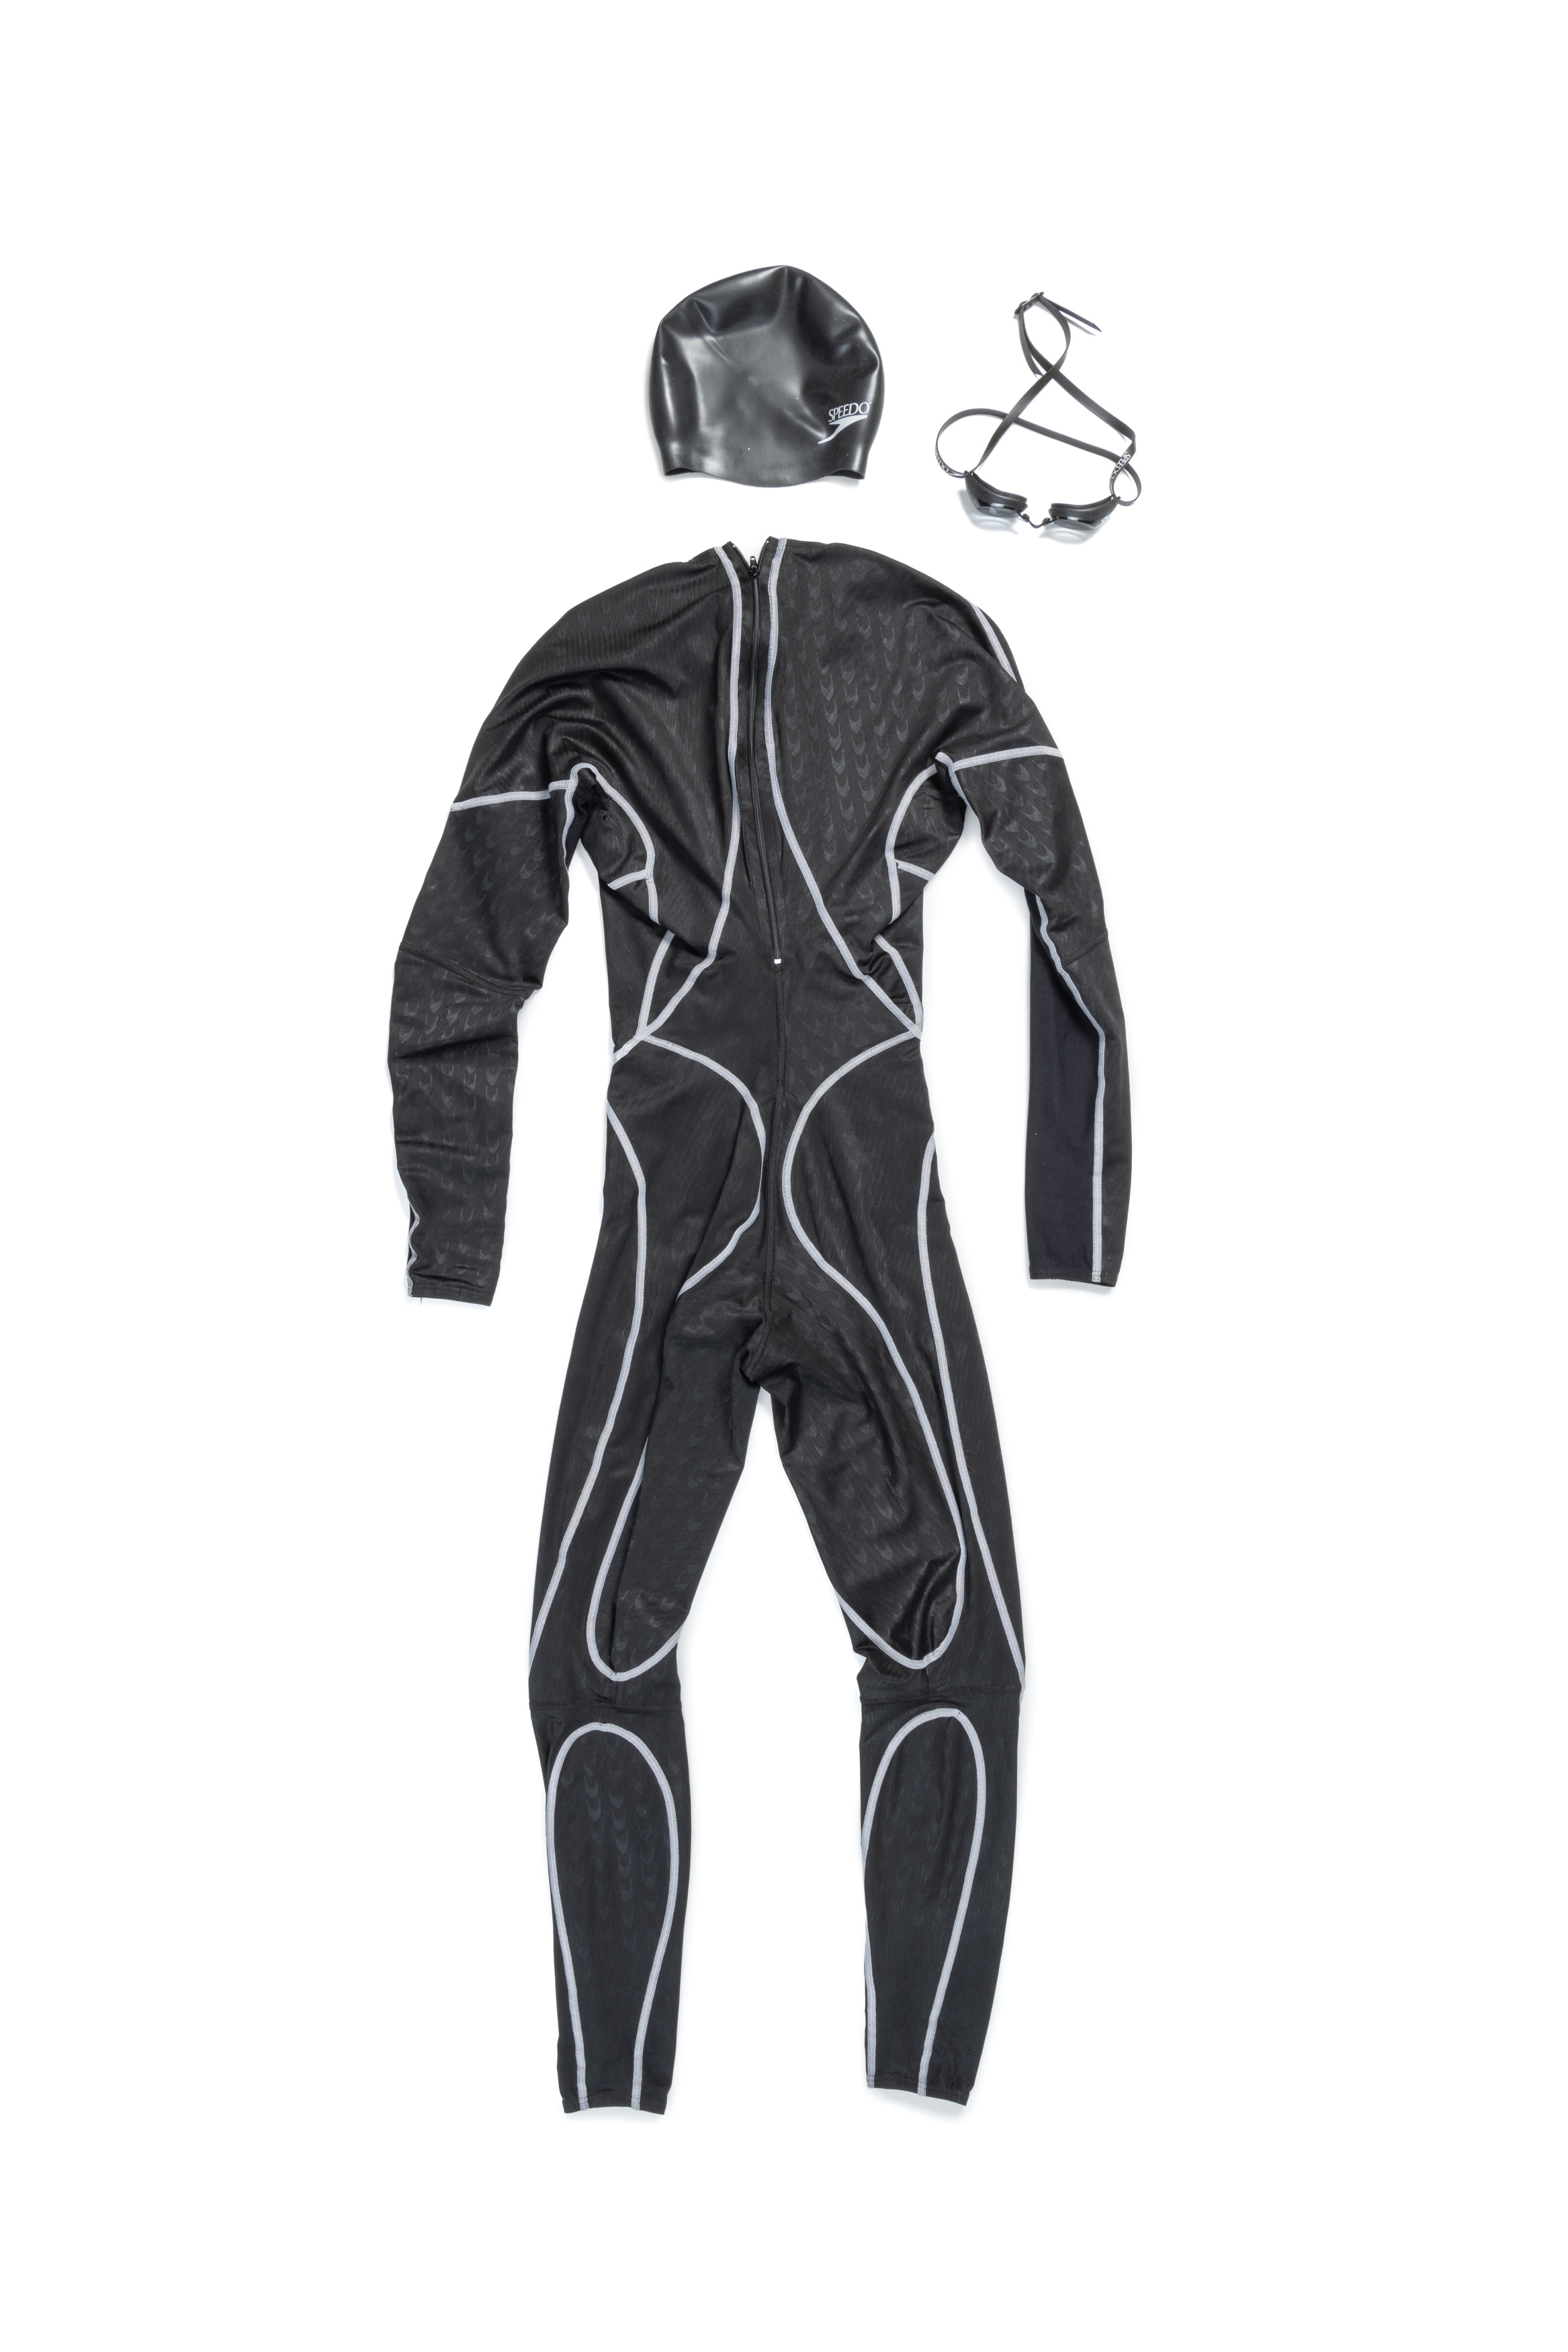 Mens Speedo 'Fastskin' swimsuit with goggles and swimming cap